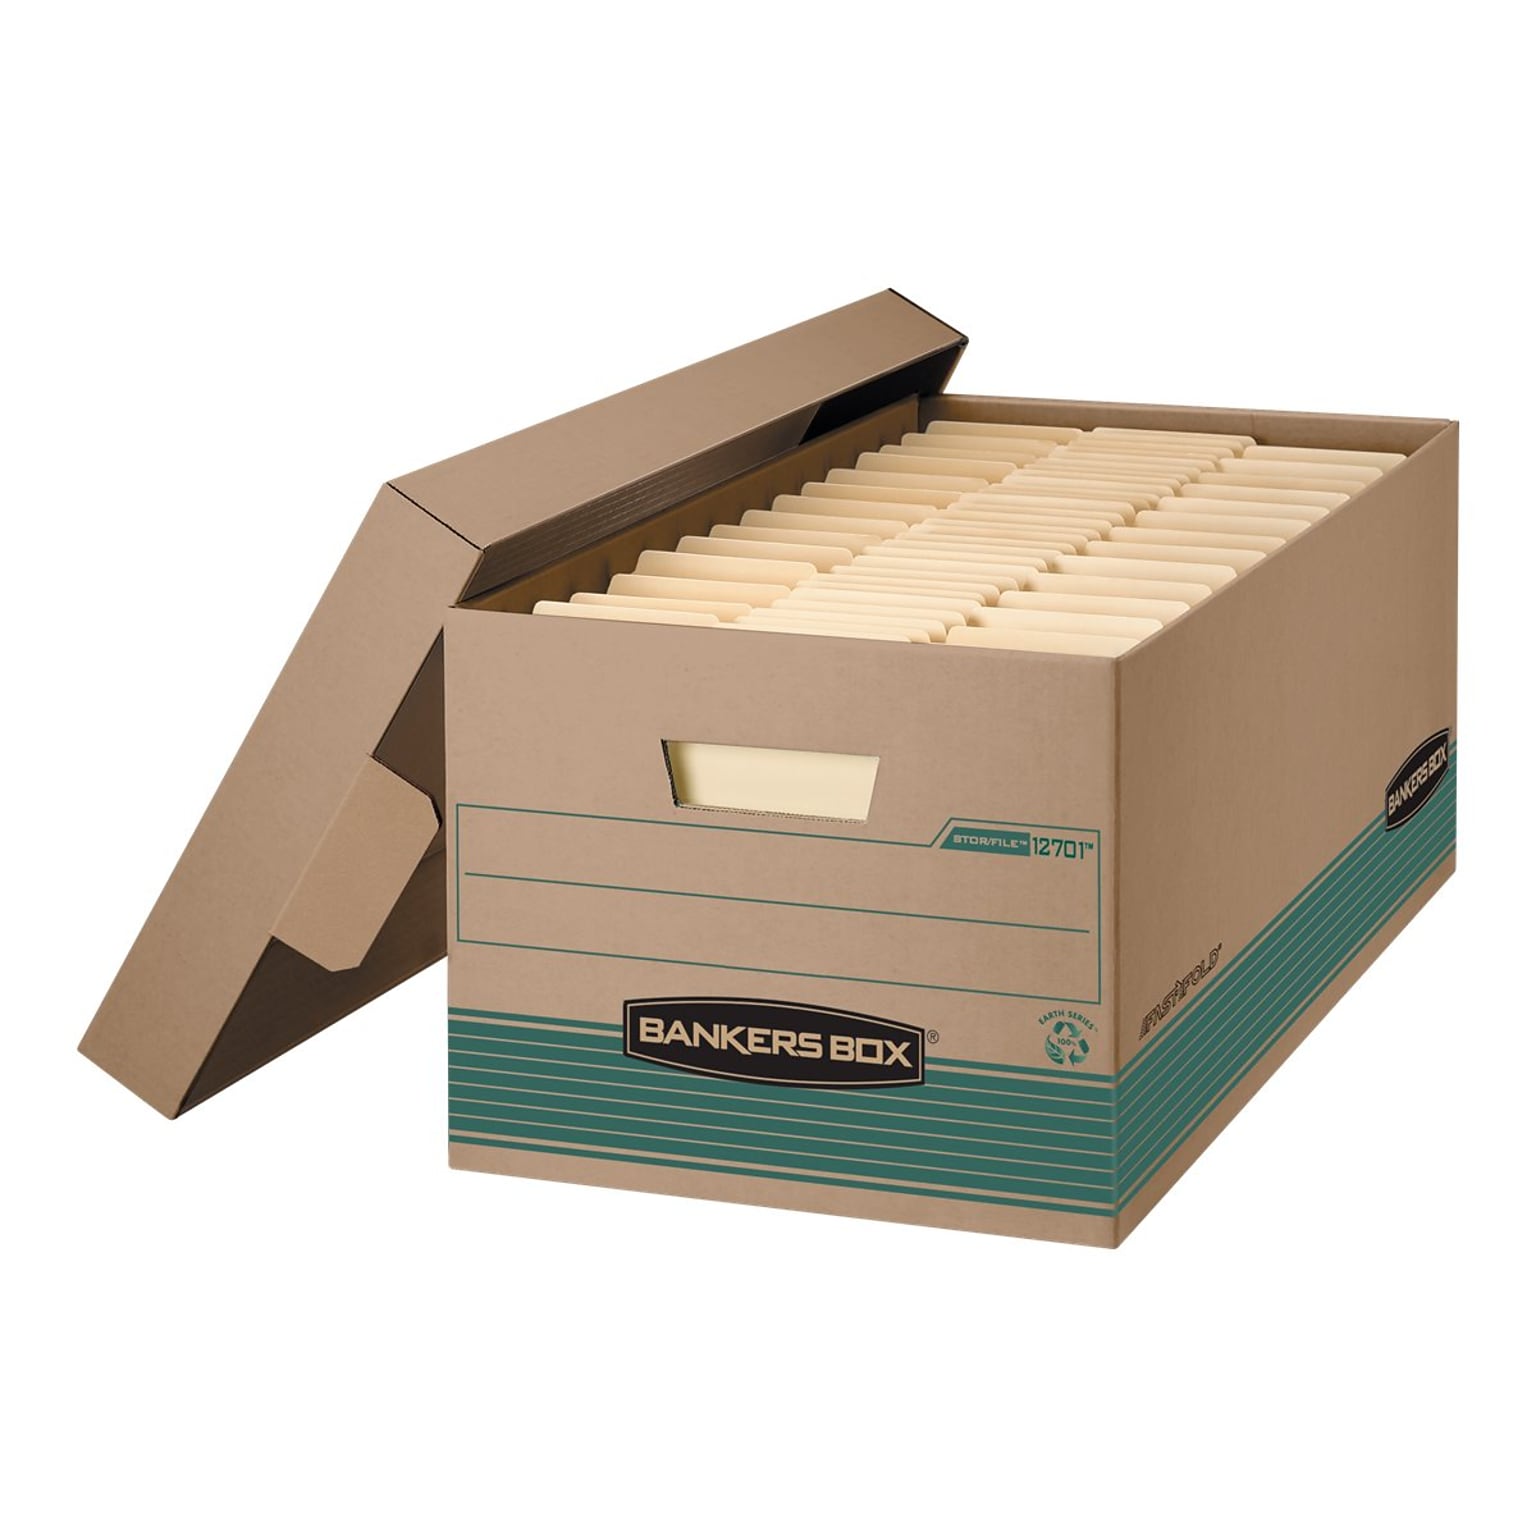 Bankers Box Stor/File Medium-Duty File Storage Boxes, Lift-Off Lid, Letter Size, Brown, 12/Carton (1270101)